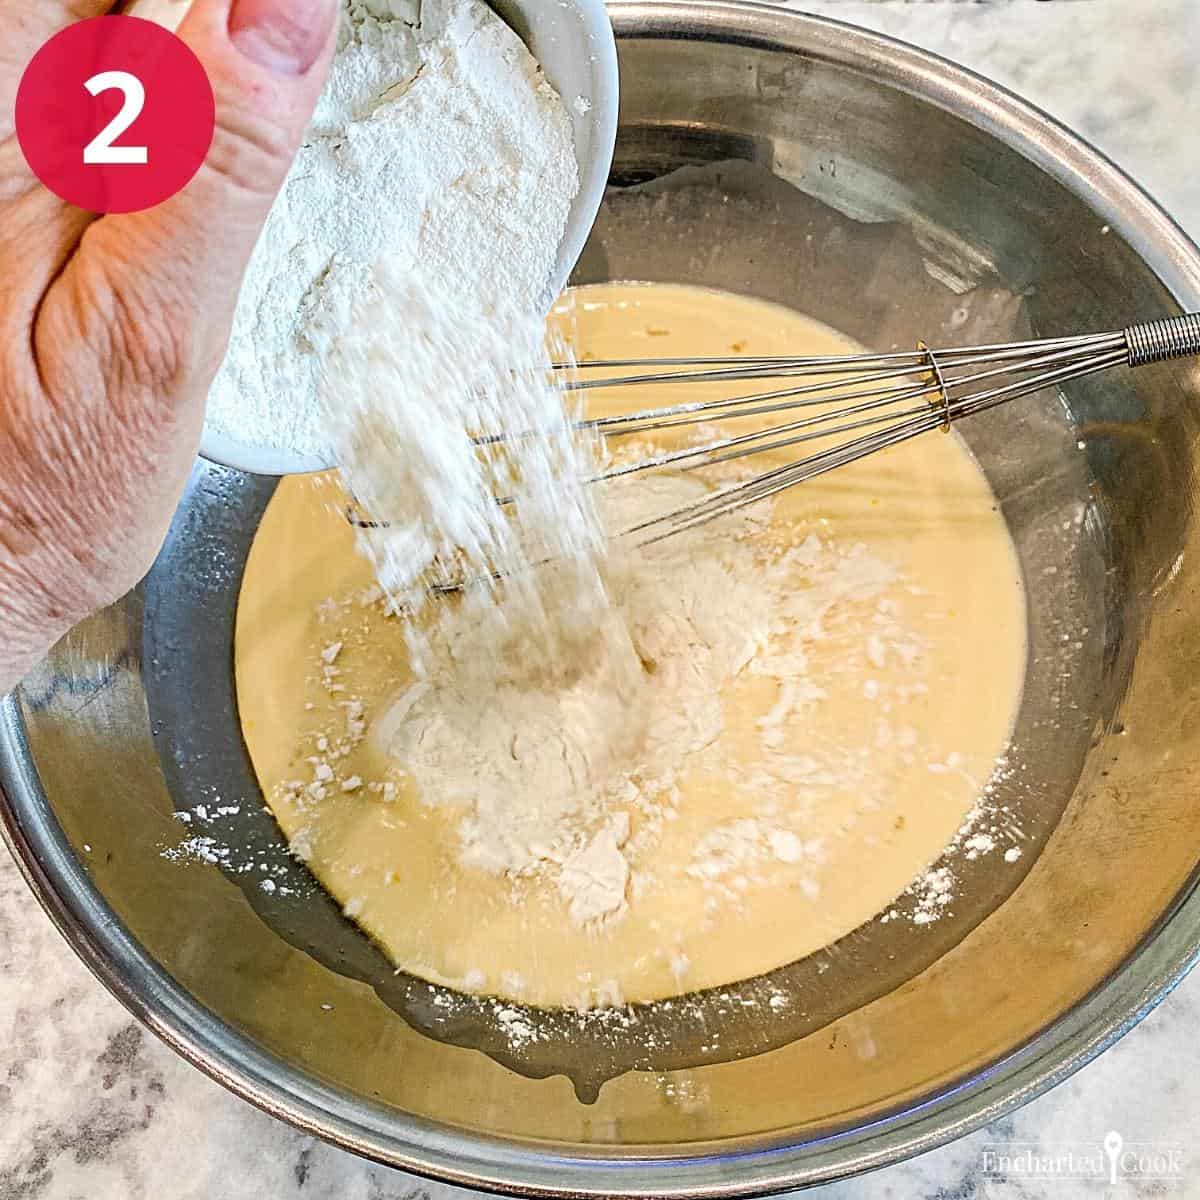 Adding flour to the wet ingredients to make the batter.